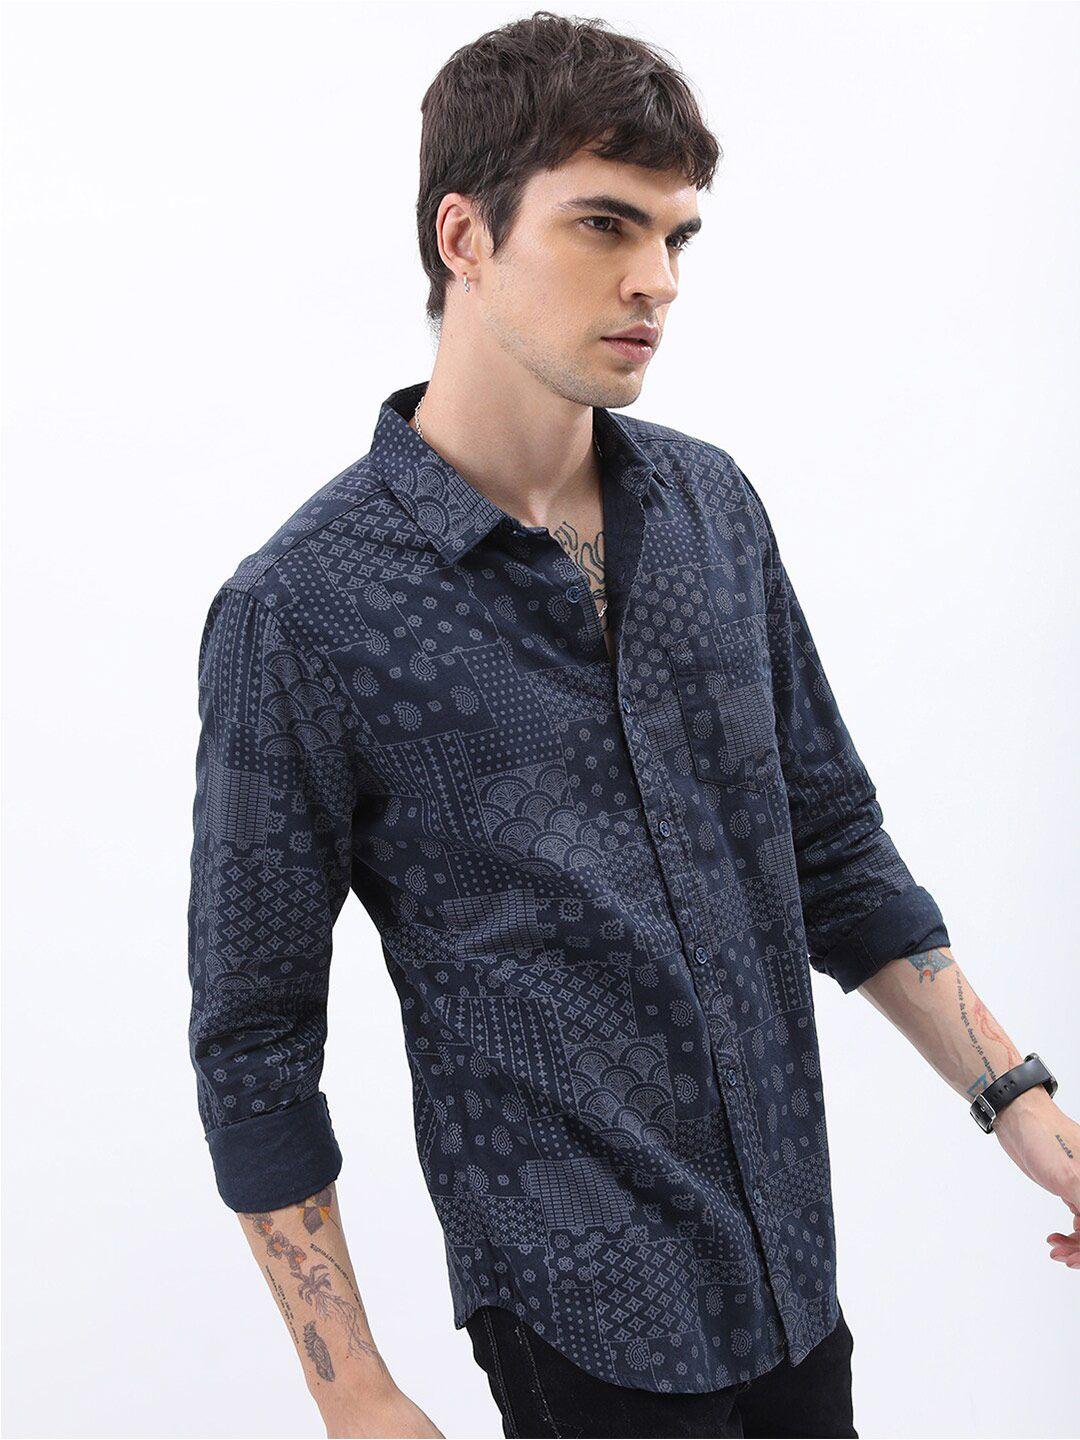 ketch-slim-fit-ethnic-printed-cotton-casual-shirt